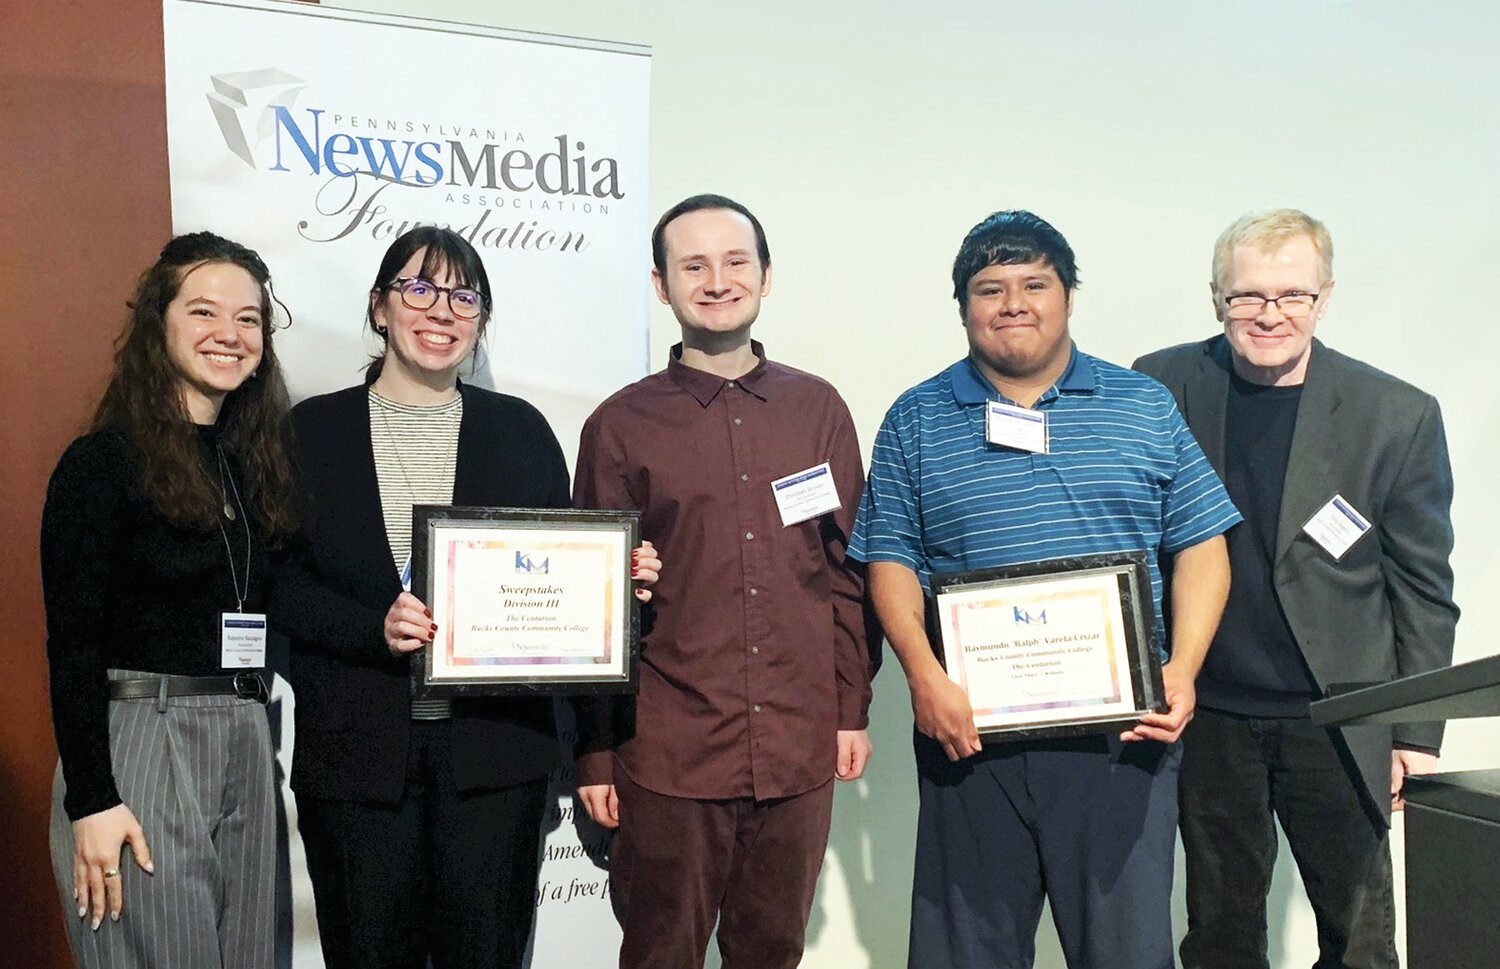 The Centurion staffers, from left, Raeanne Raccagno, Madison Kifolo, Christian Grosso and Raymundo Varela-Urizar, stand with journalism professor and newspaper advisor Tony Rogers at the Student Keystone Media Awards reception in April.